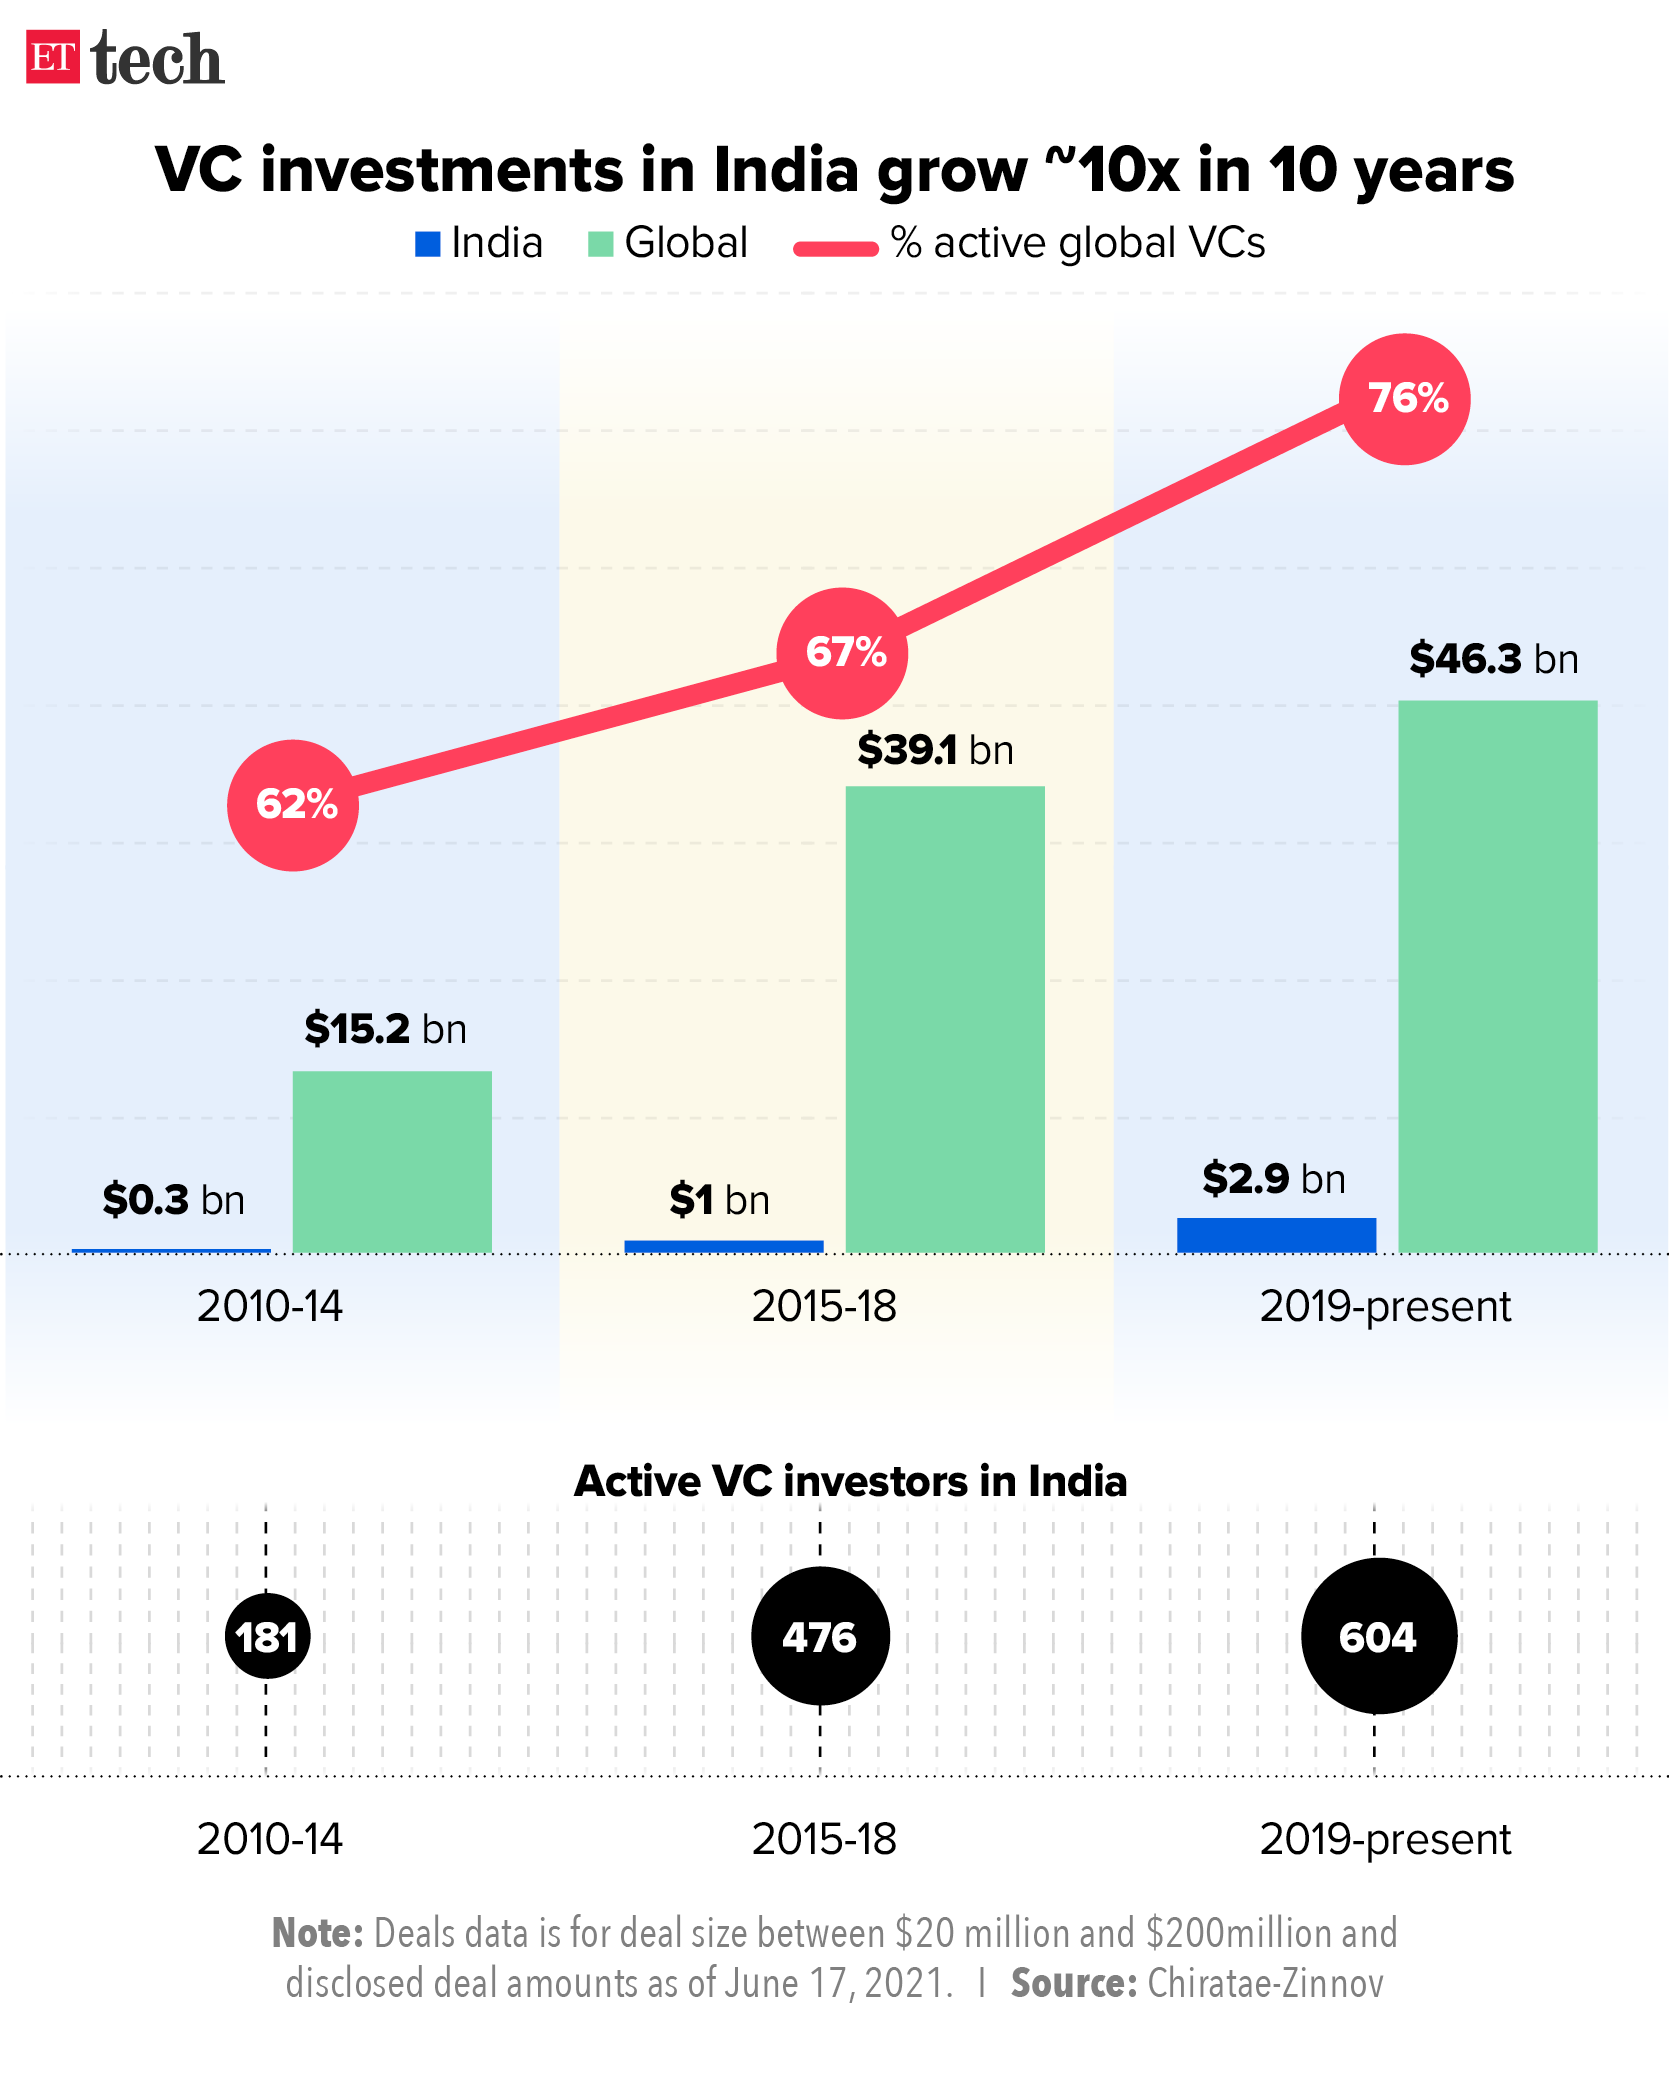 VC investments in India